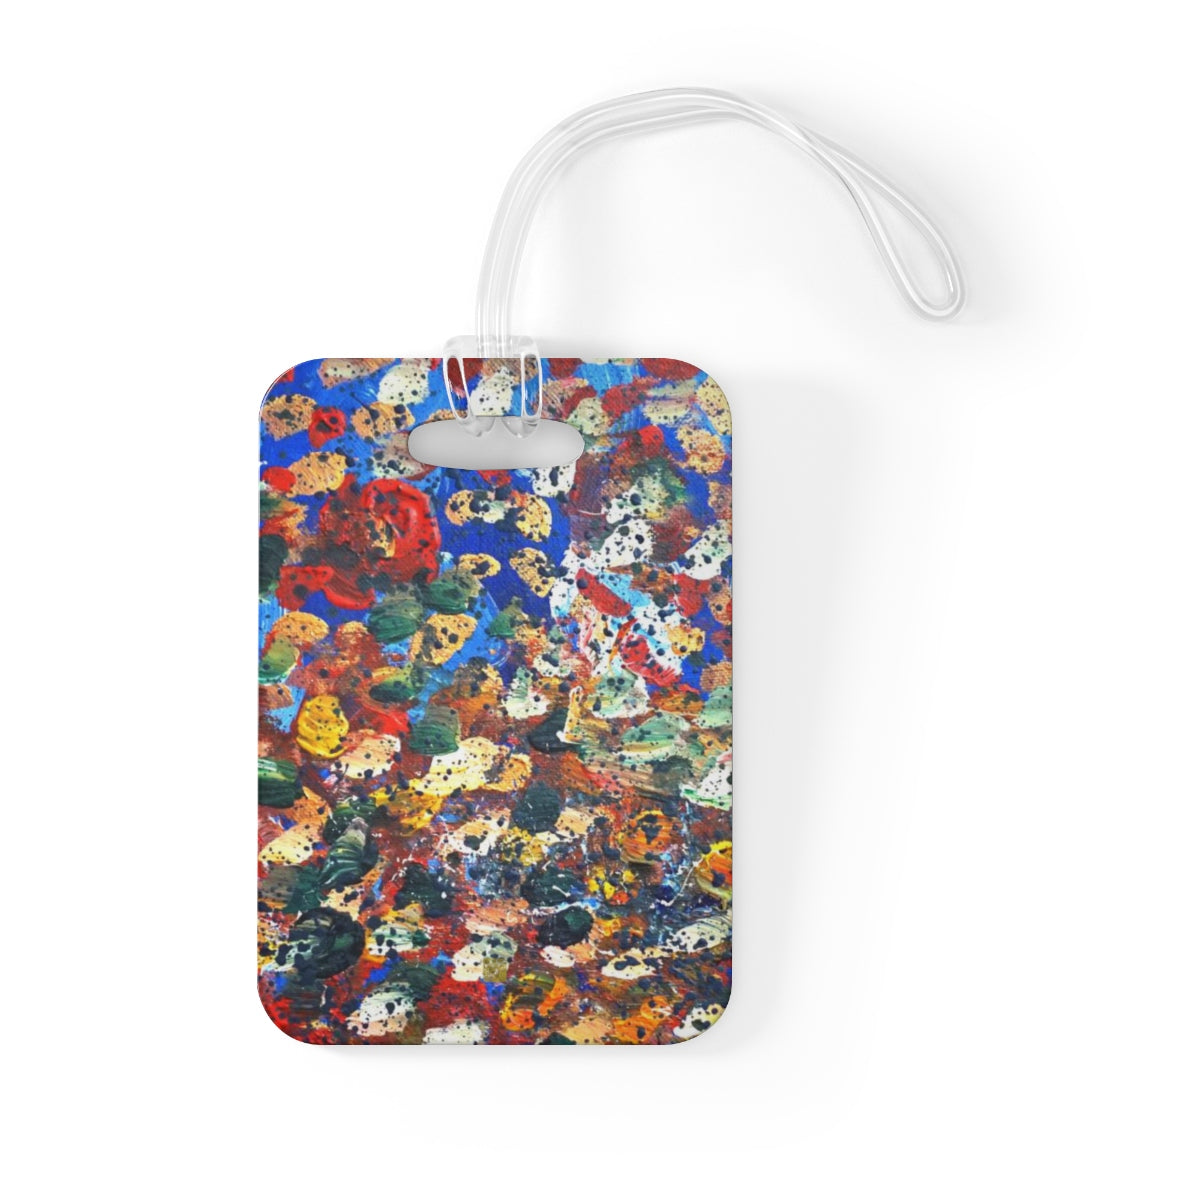 Raindrops 2/3 Designer Abstract Artistic Dotted, Glossy Lightweight Plastic Bag Tag, Made in USA - alicechanart